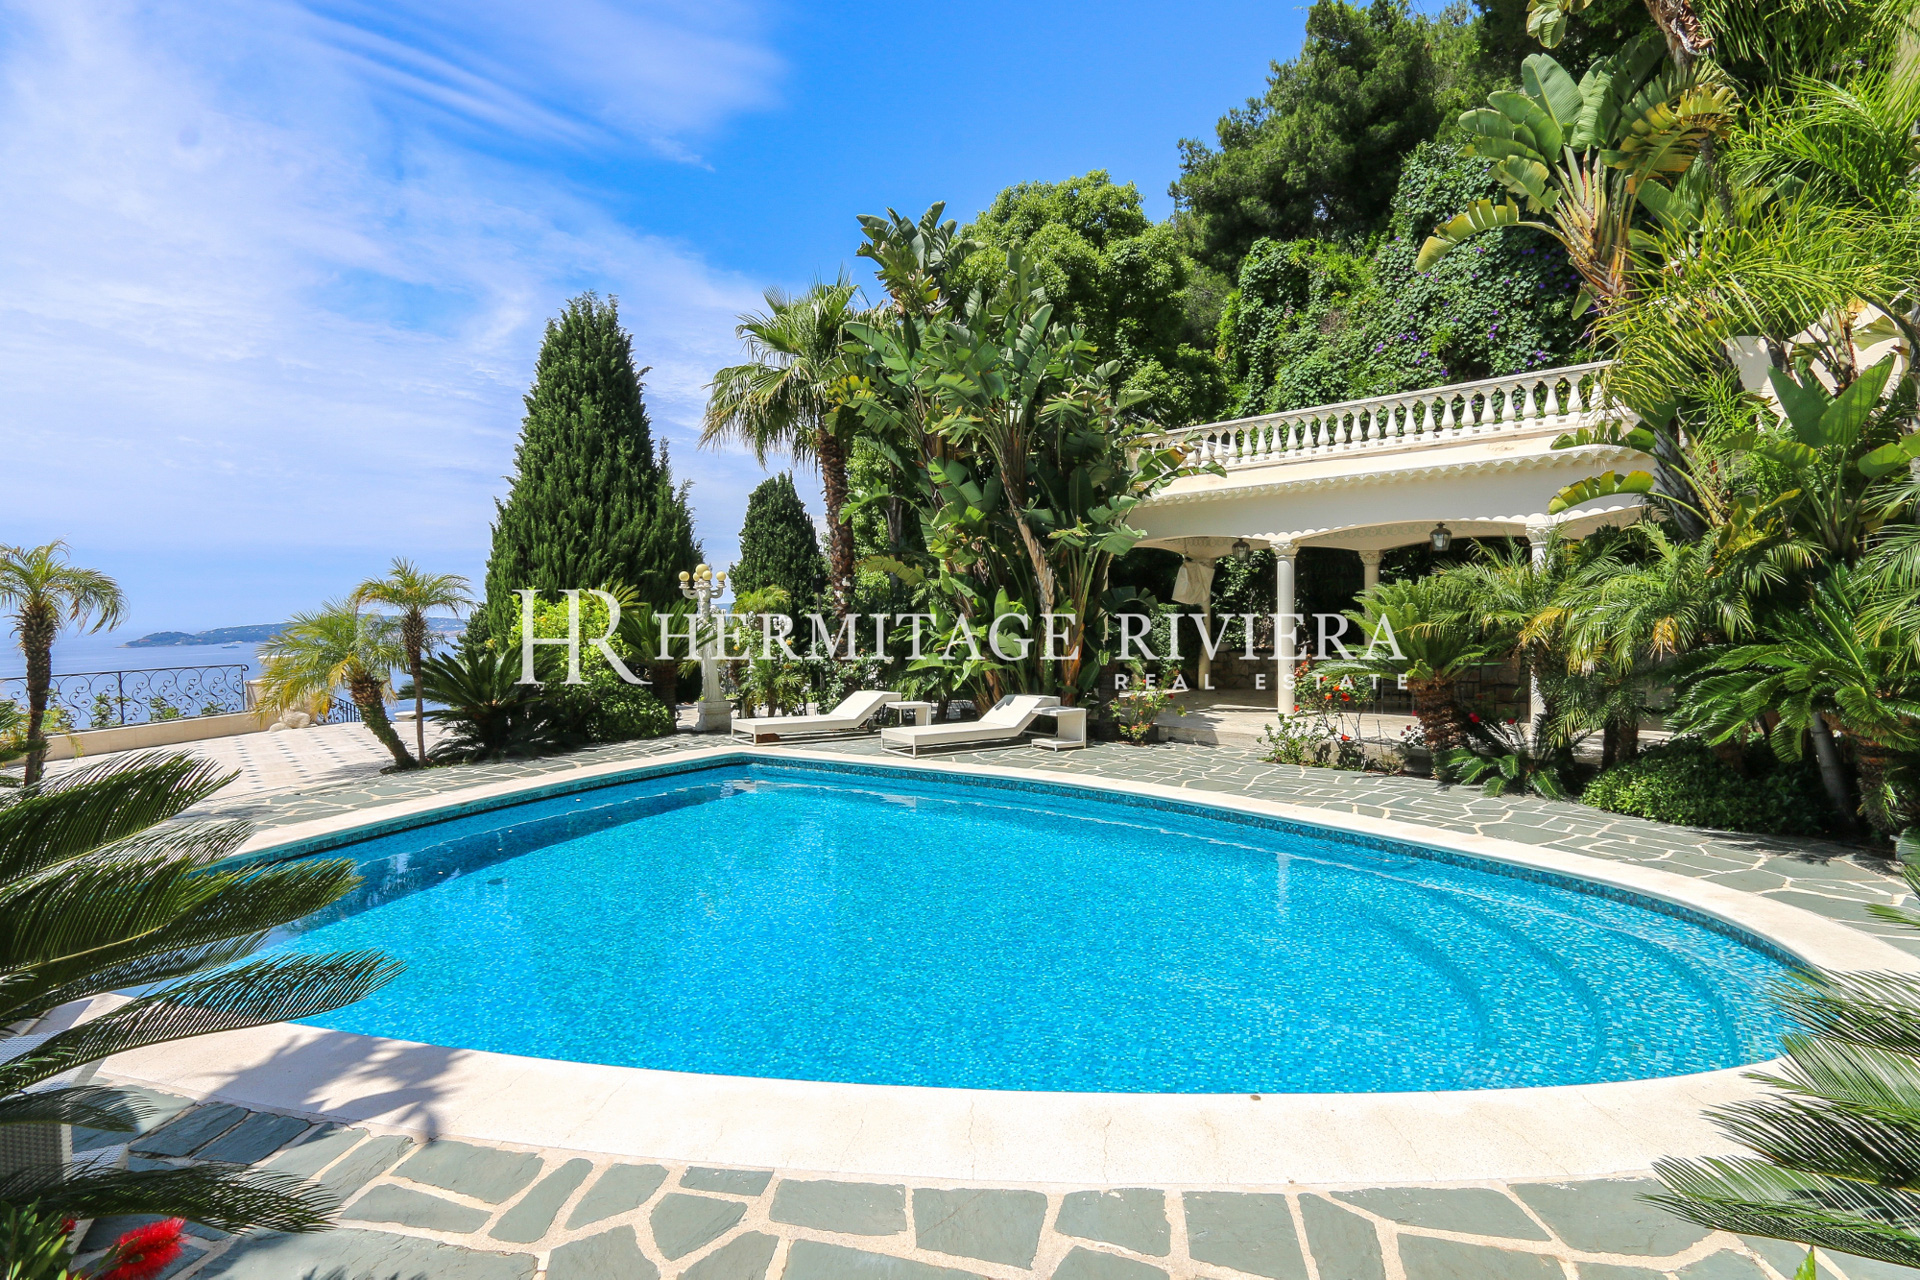 Property close Monaco with panoramic view (image 28)